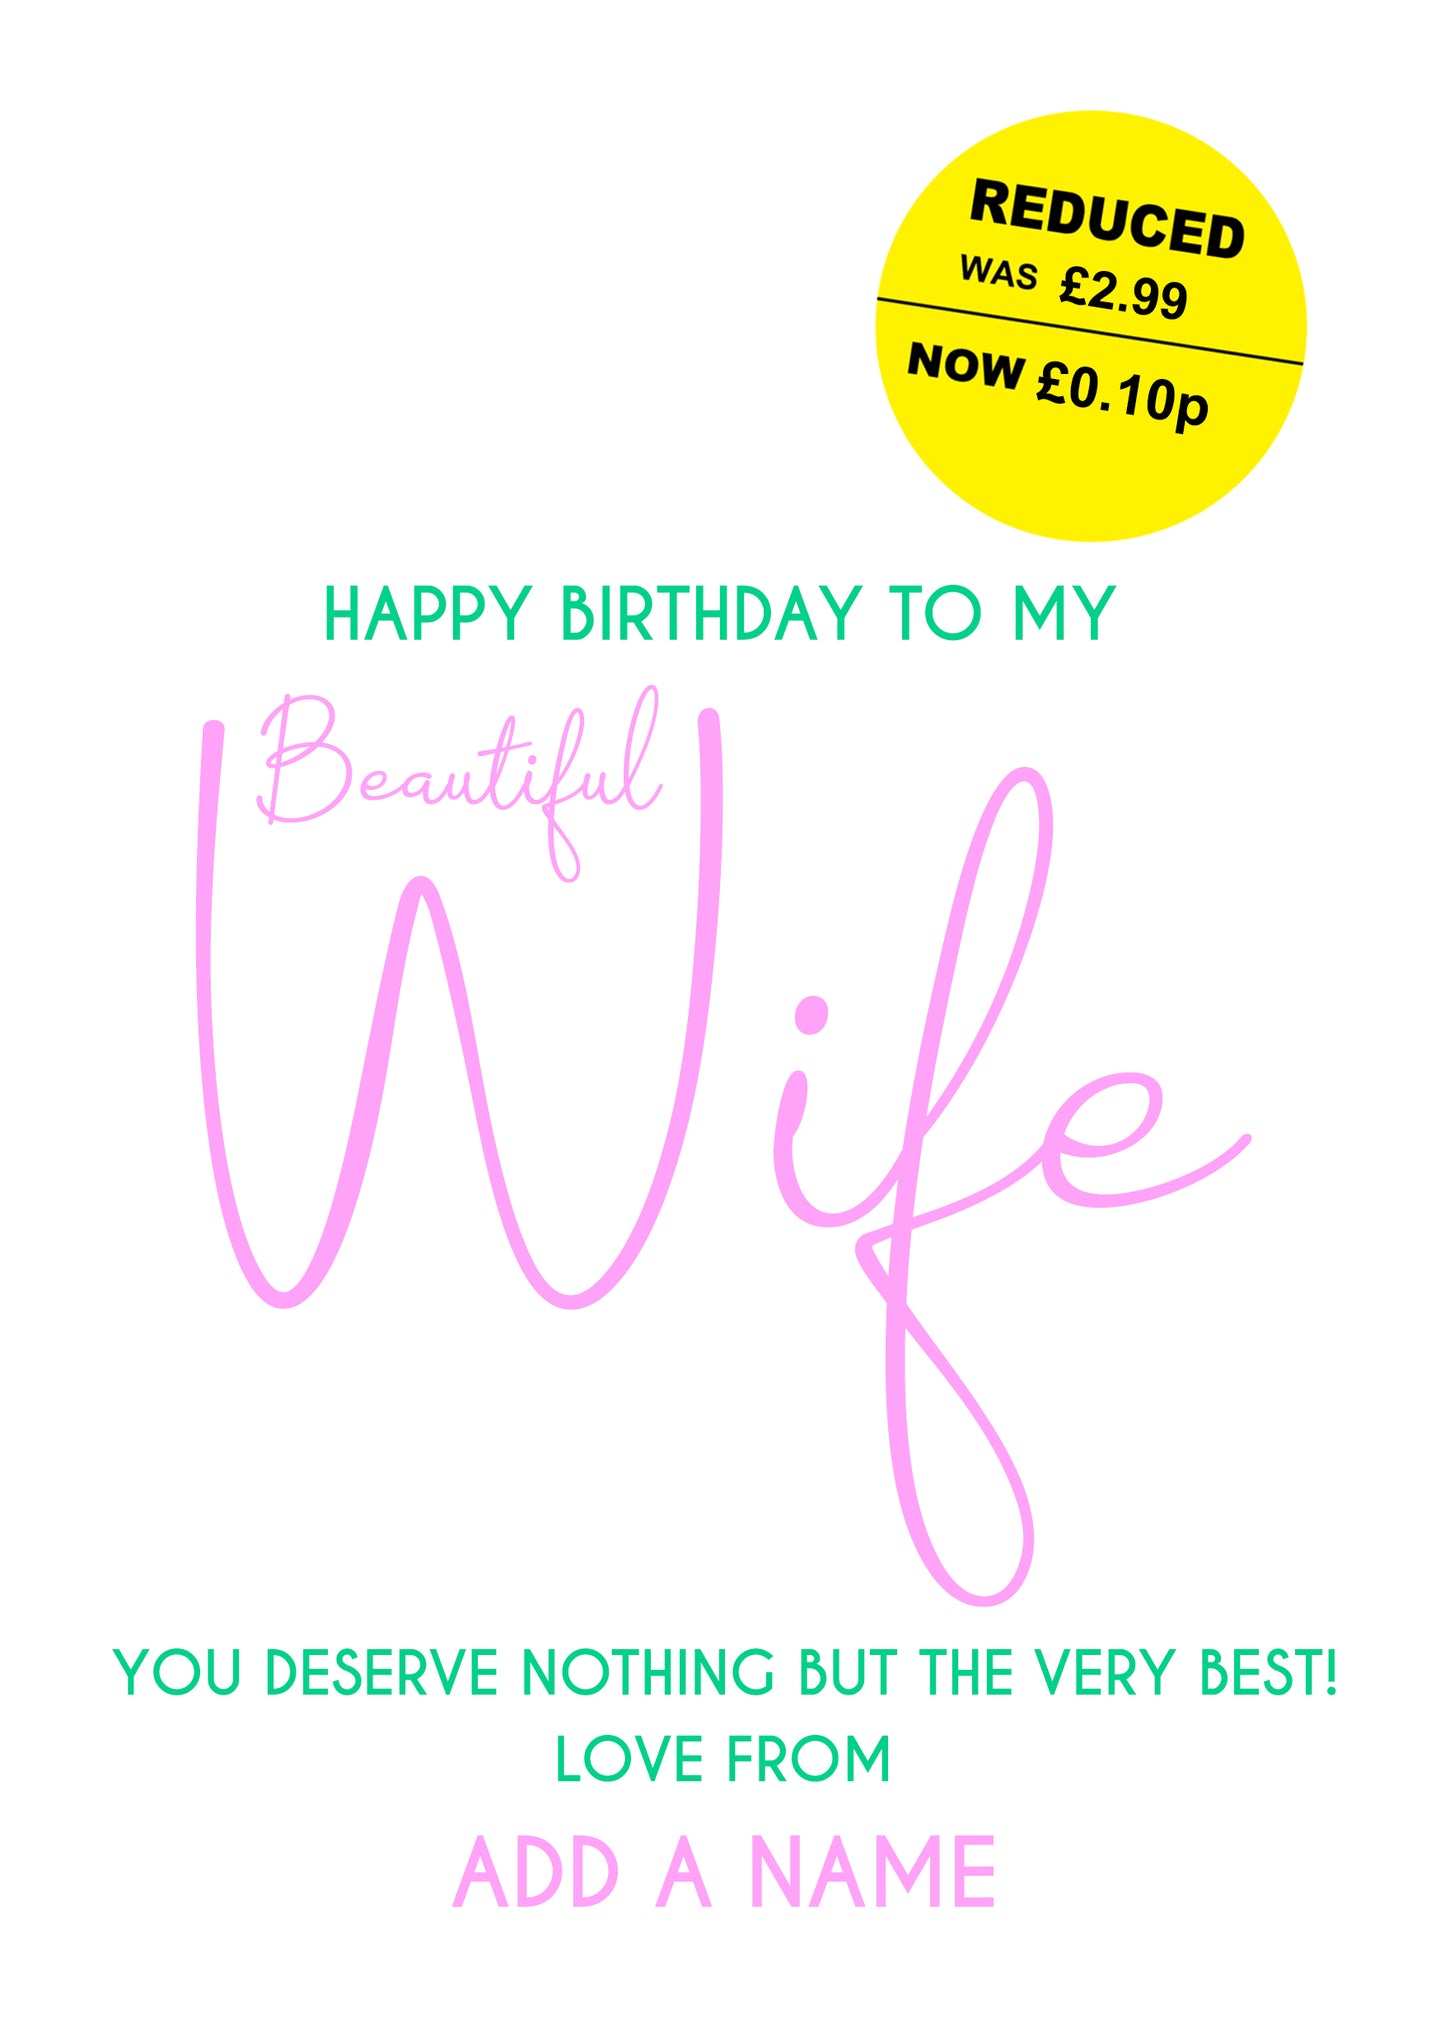 Reduced Price Wife Birthday Card